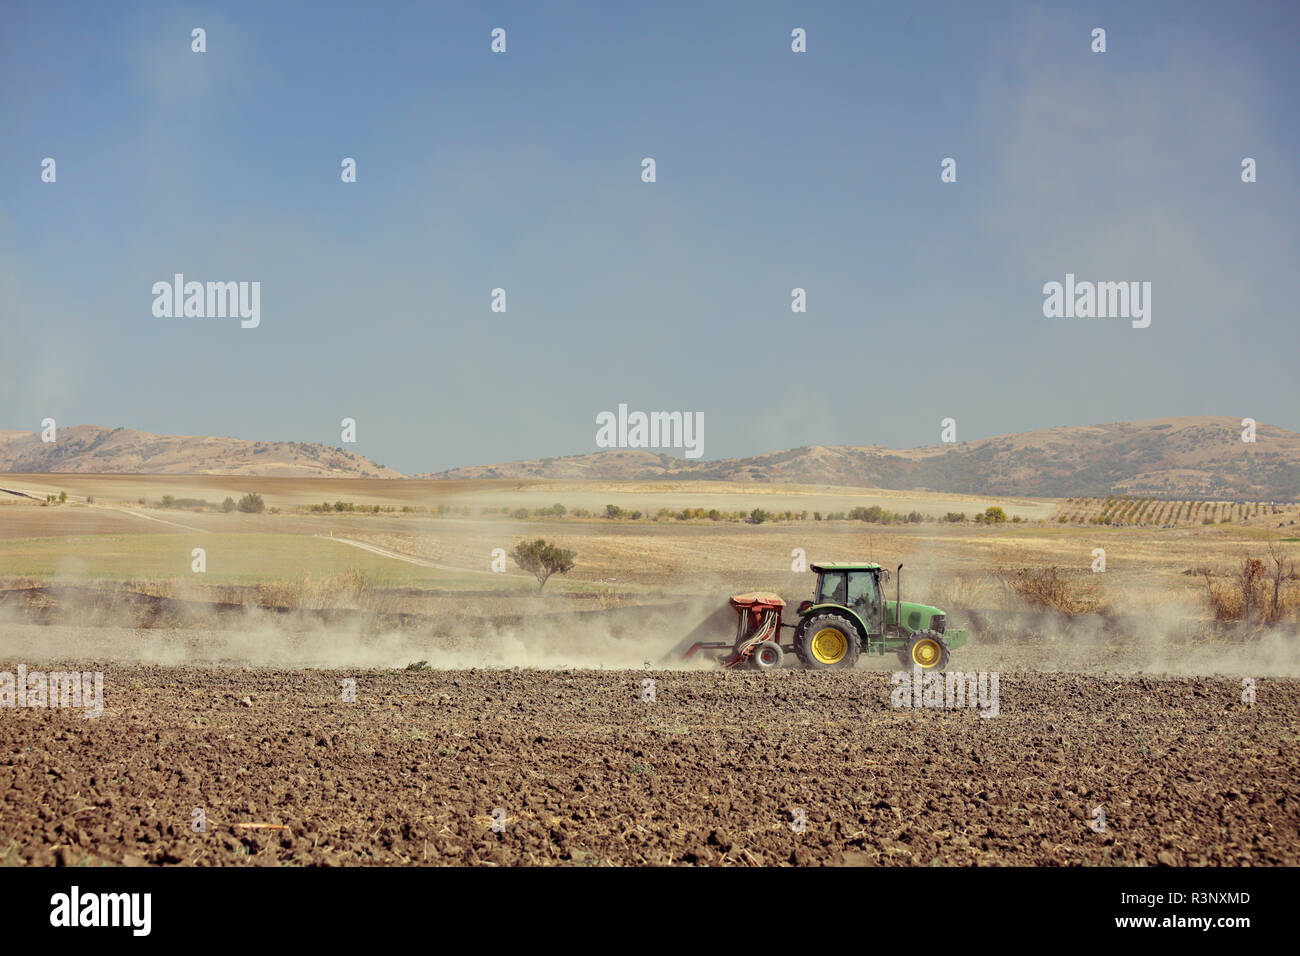 Tractor cultivating a soil field Stock Photo